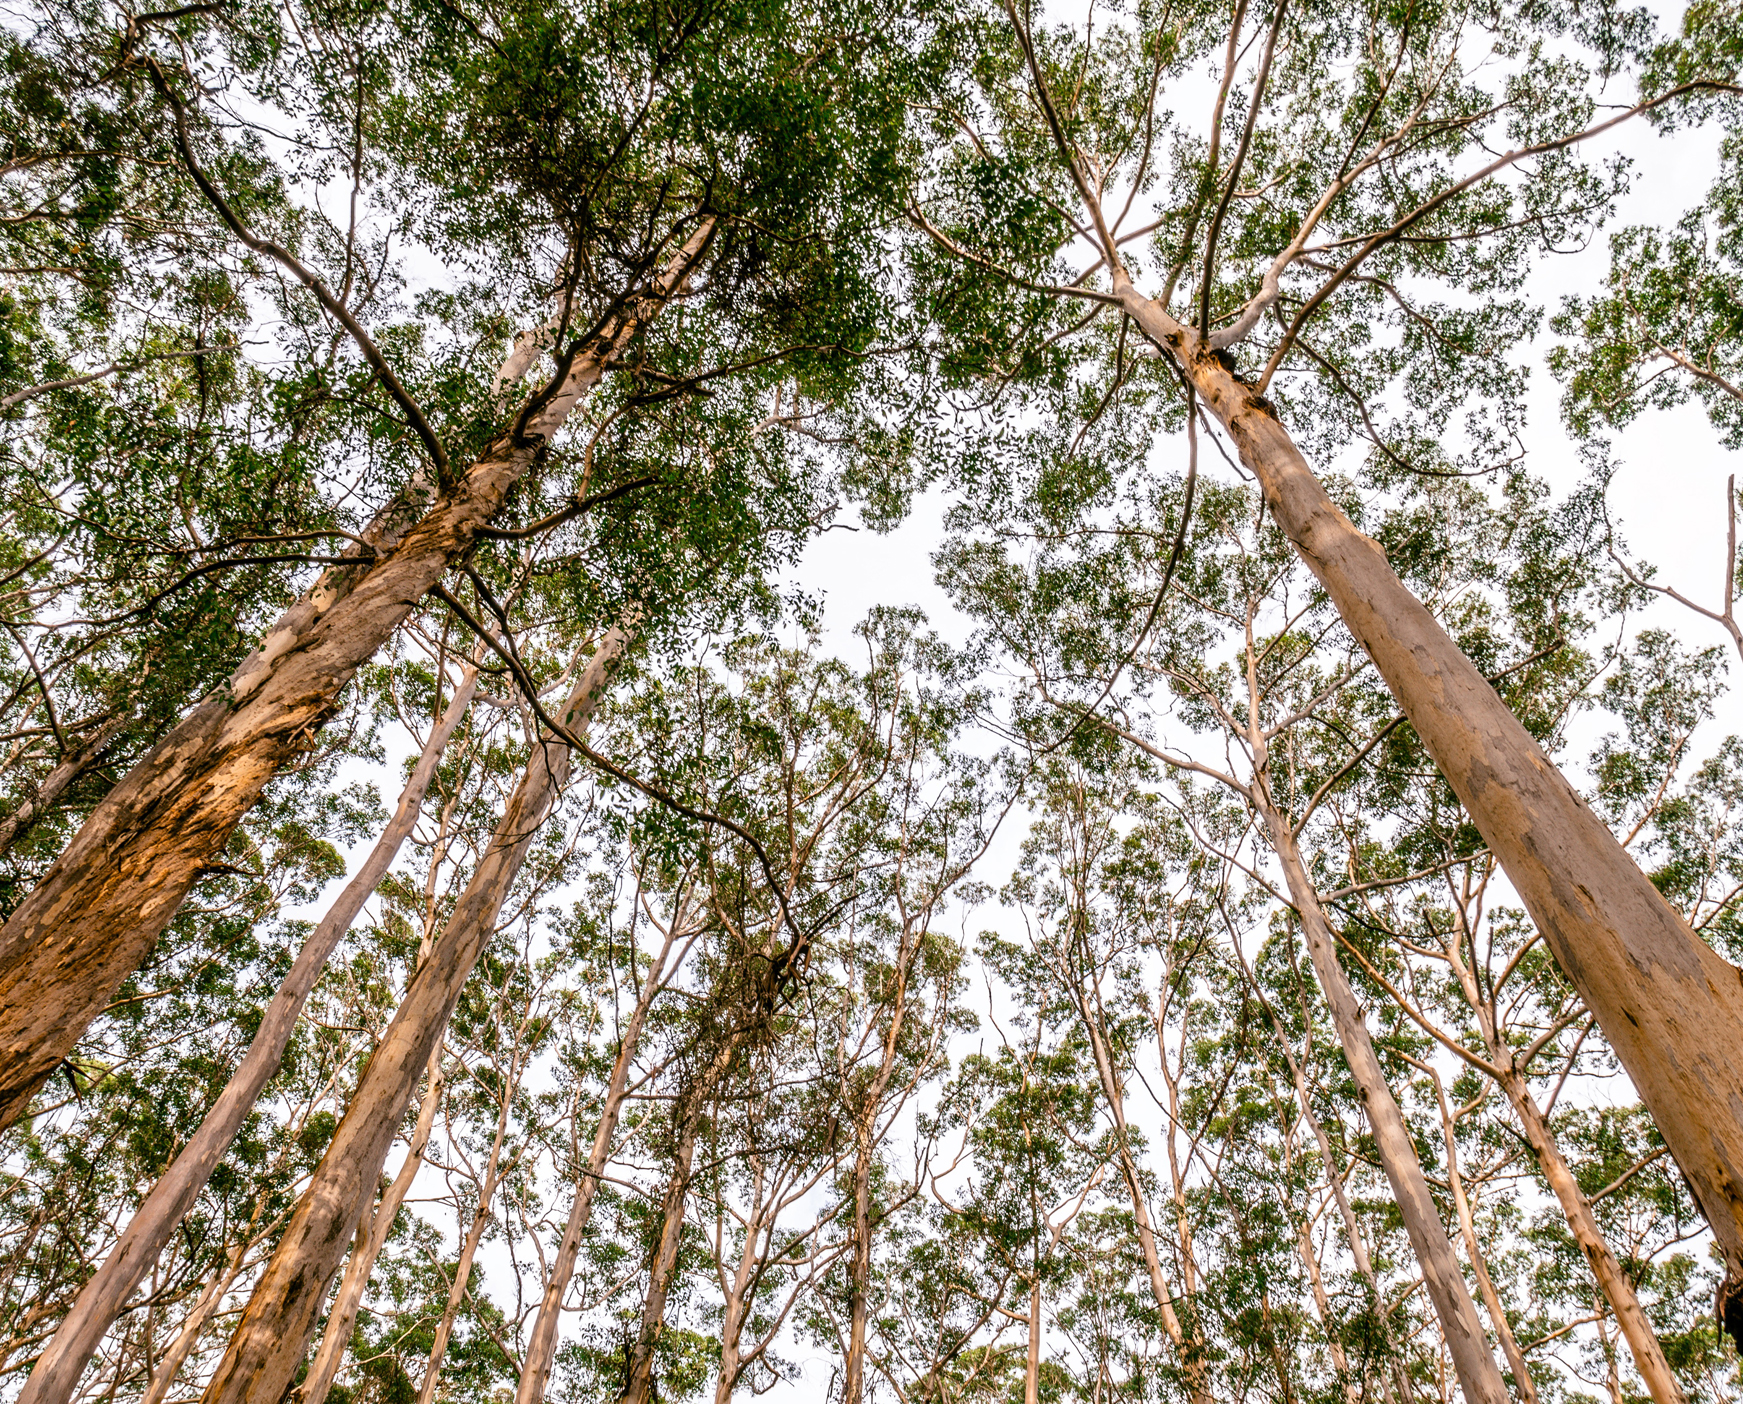 Looking up towards the treetops in a forest